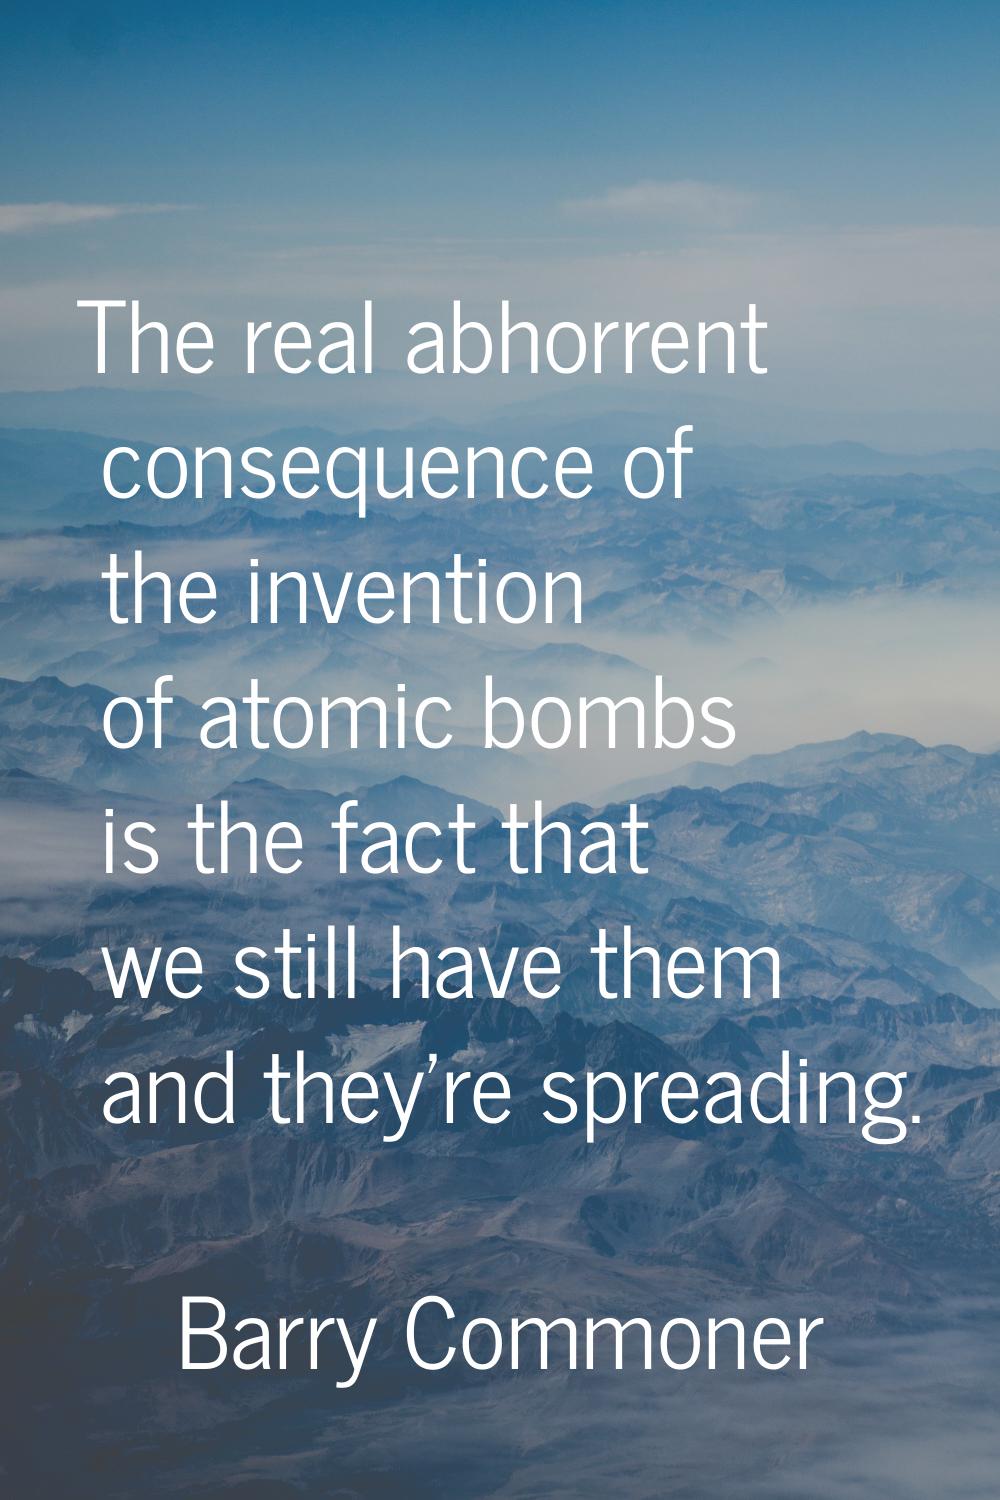 The real abhorrent consequence of the invention of atomic bombs is the fact that we still have them